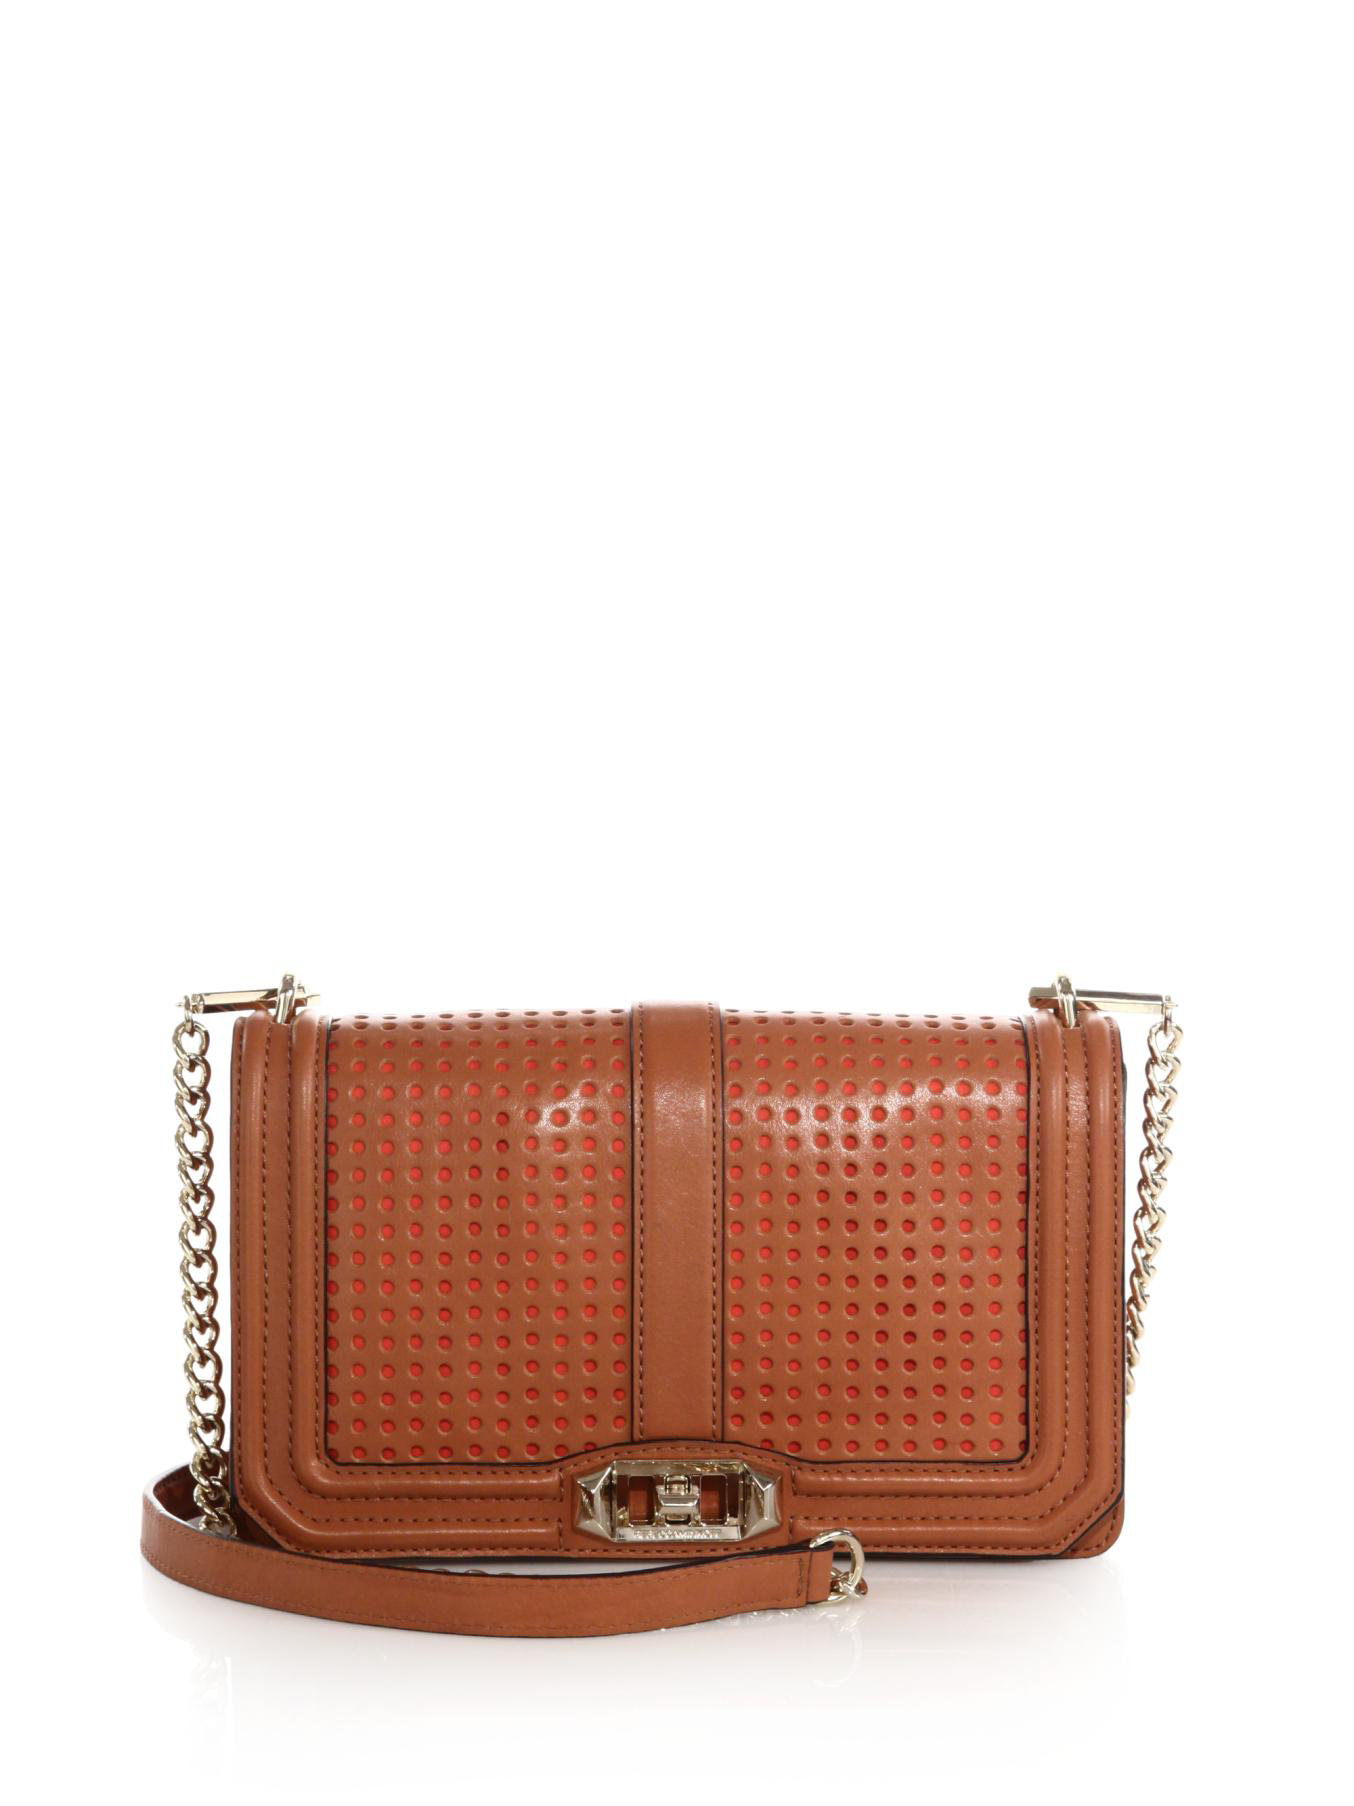 Rebecca minkoff Love Perforated Crossbody Bag in Brown | Lyst